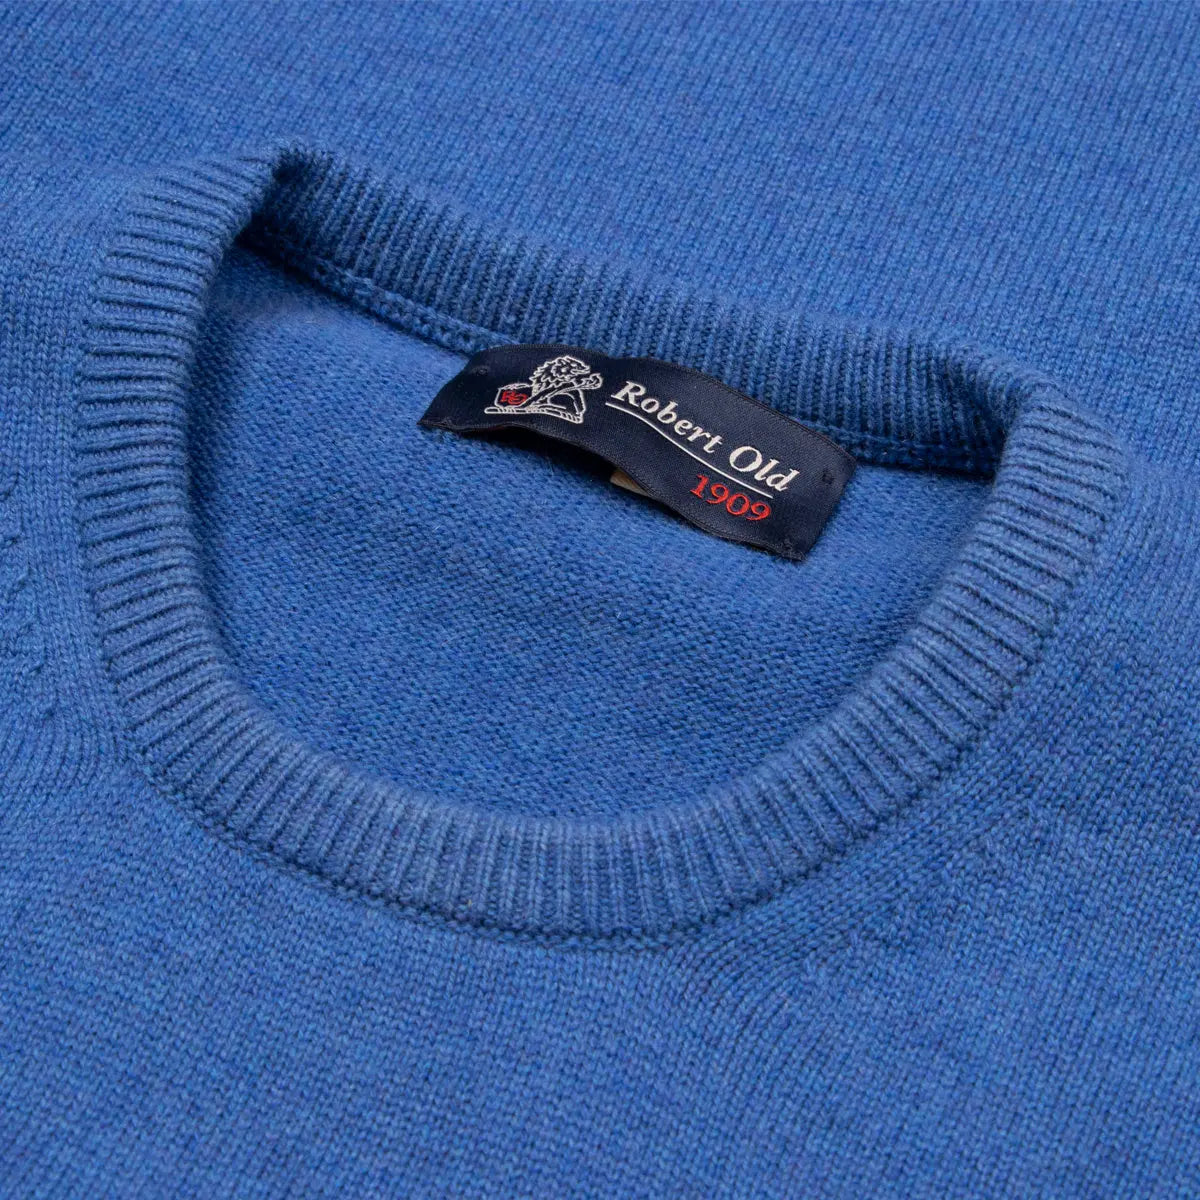 The Tiree 4ply Crew Neck Cashmere Sweater - Tay Blue  Robert Old   